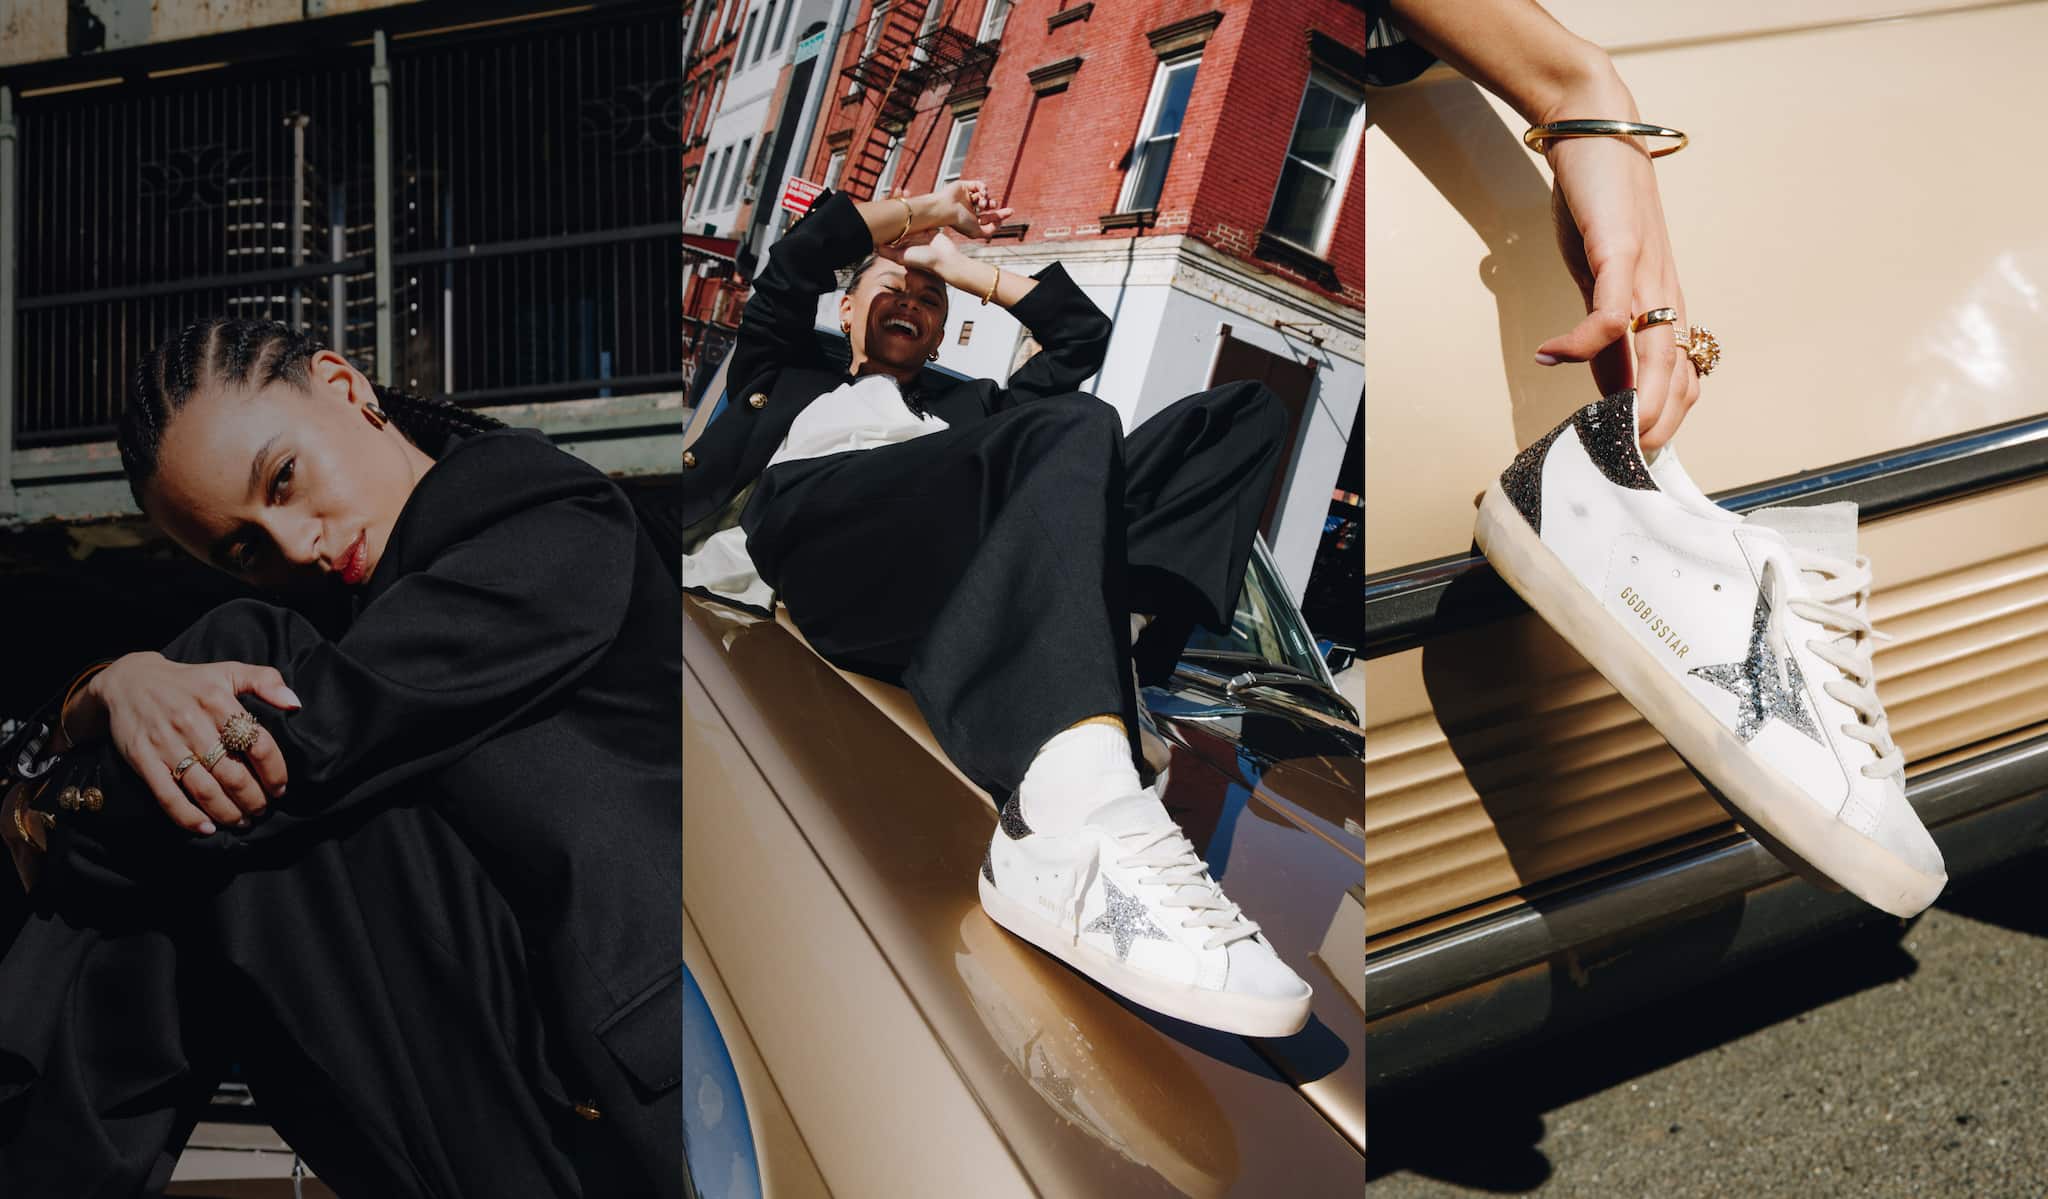 Golden Goose: sneakers and clothes for men and women